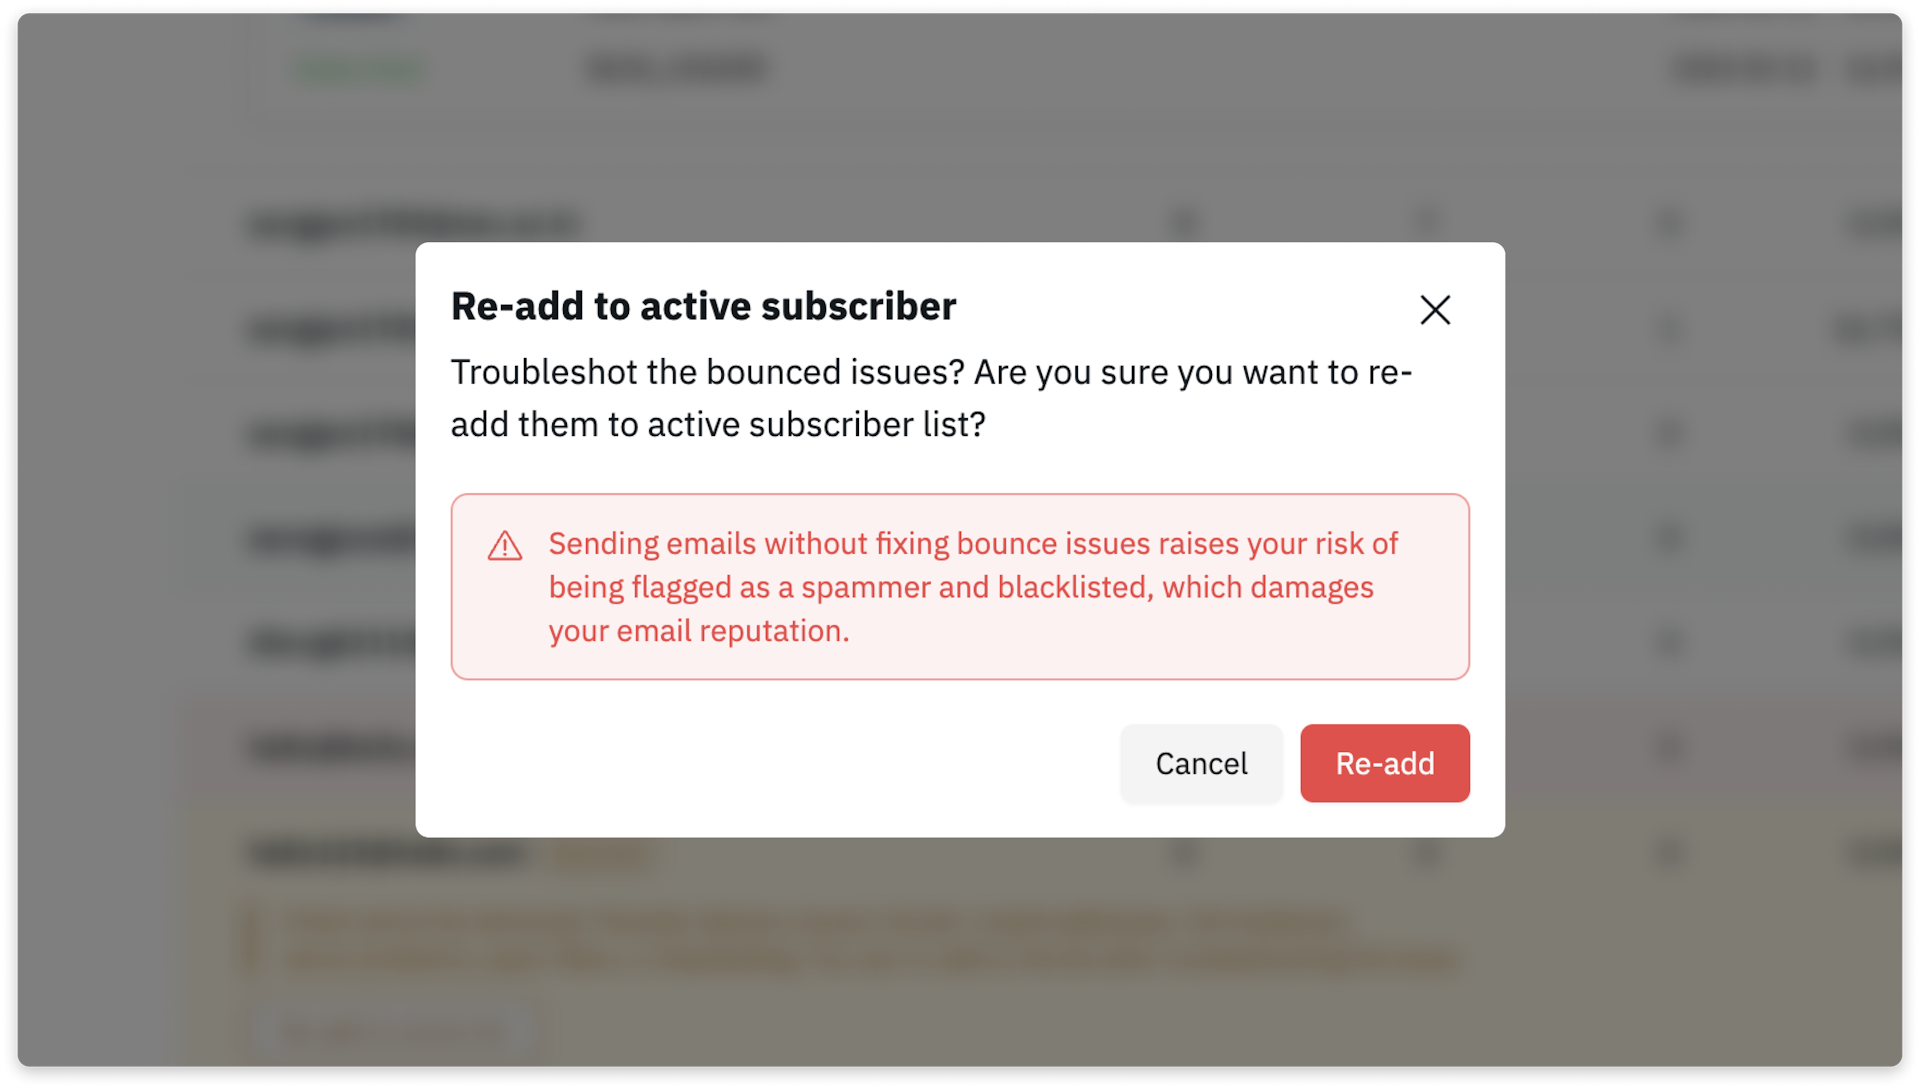 How to re-add bounced users?